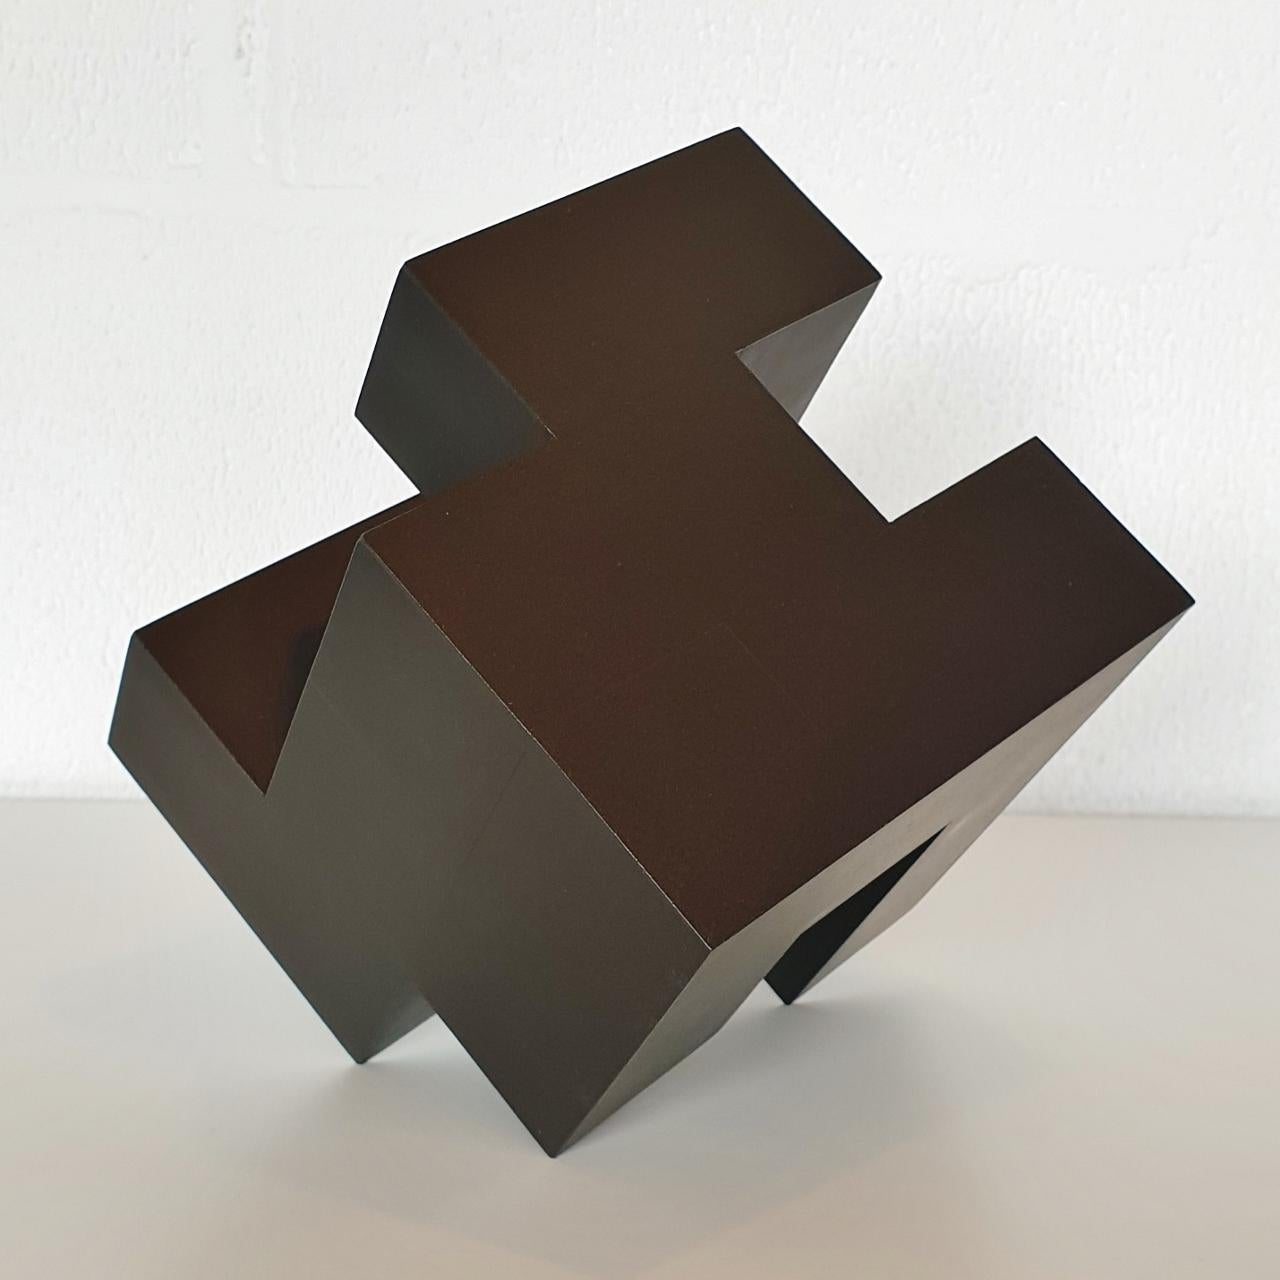 abstract cube sculpture